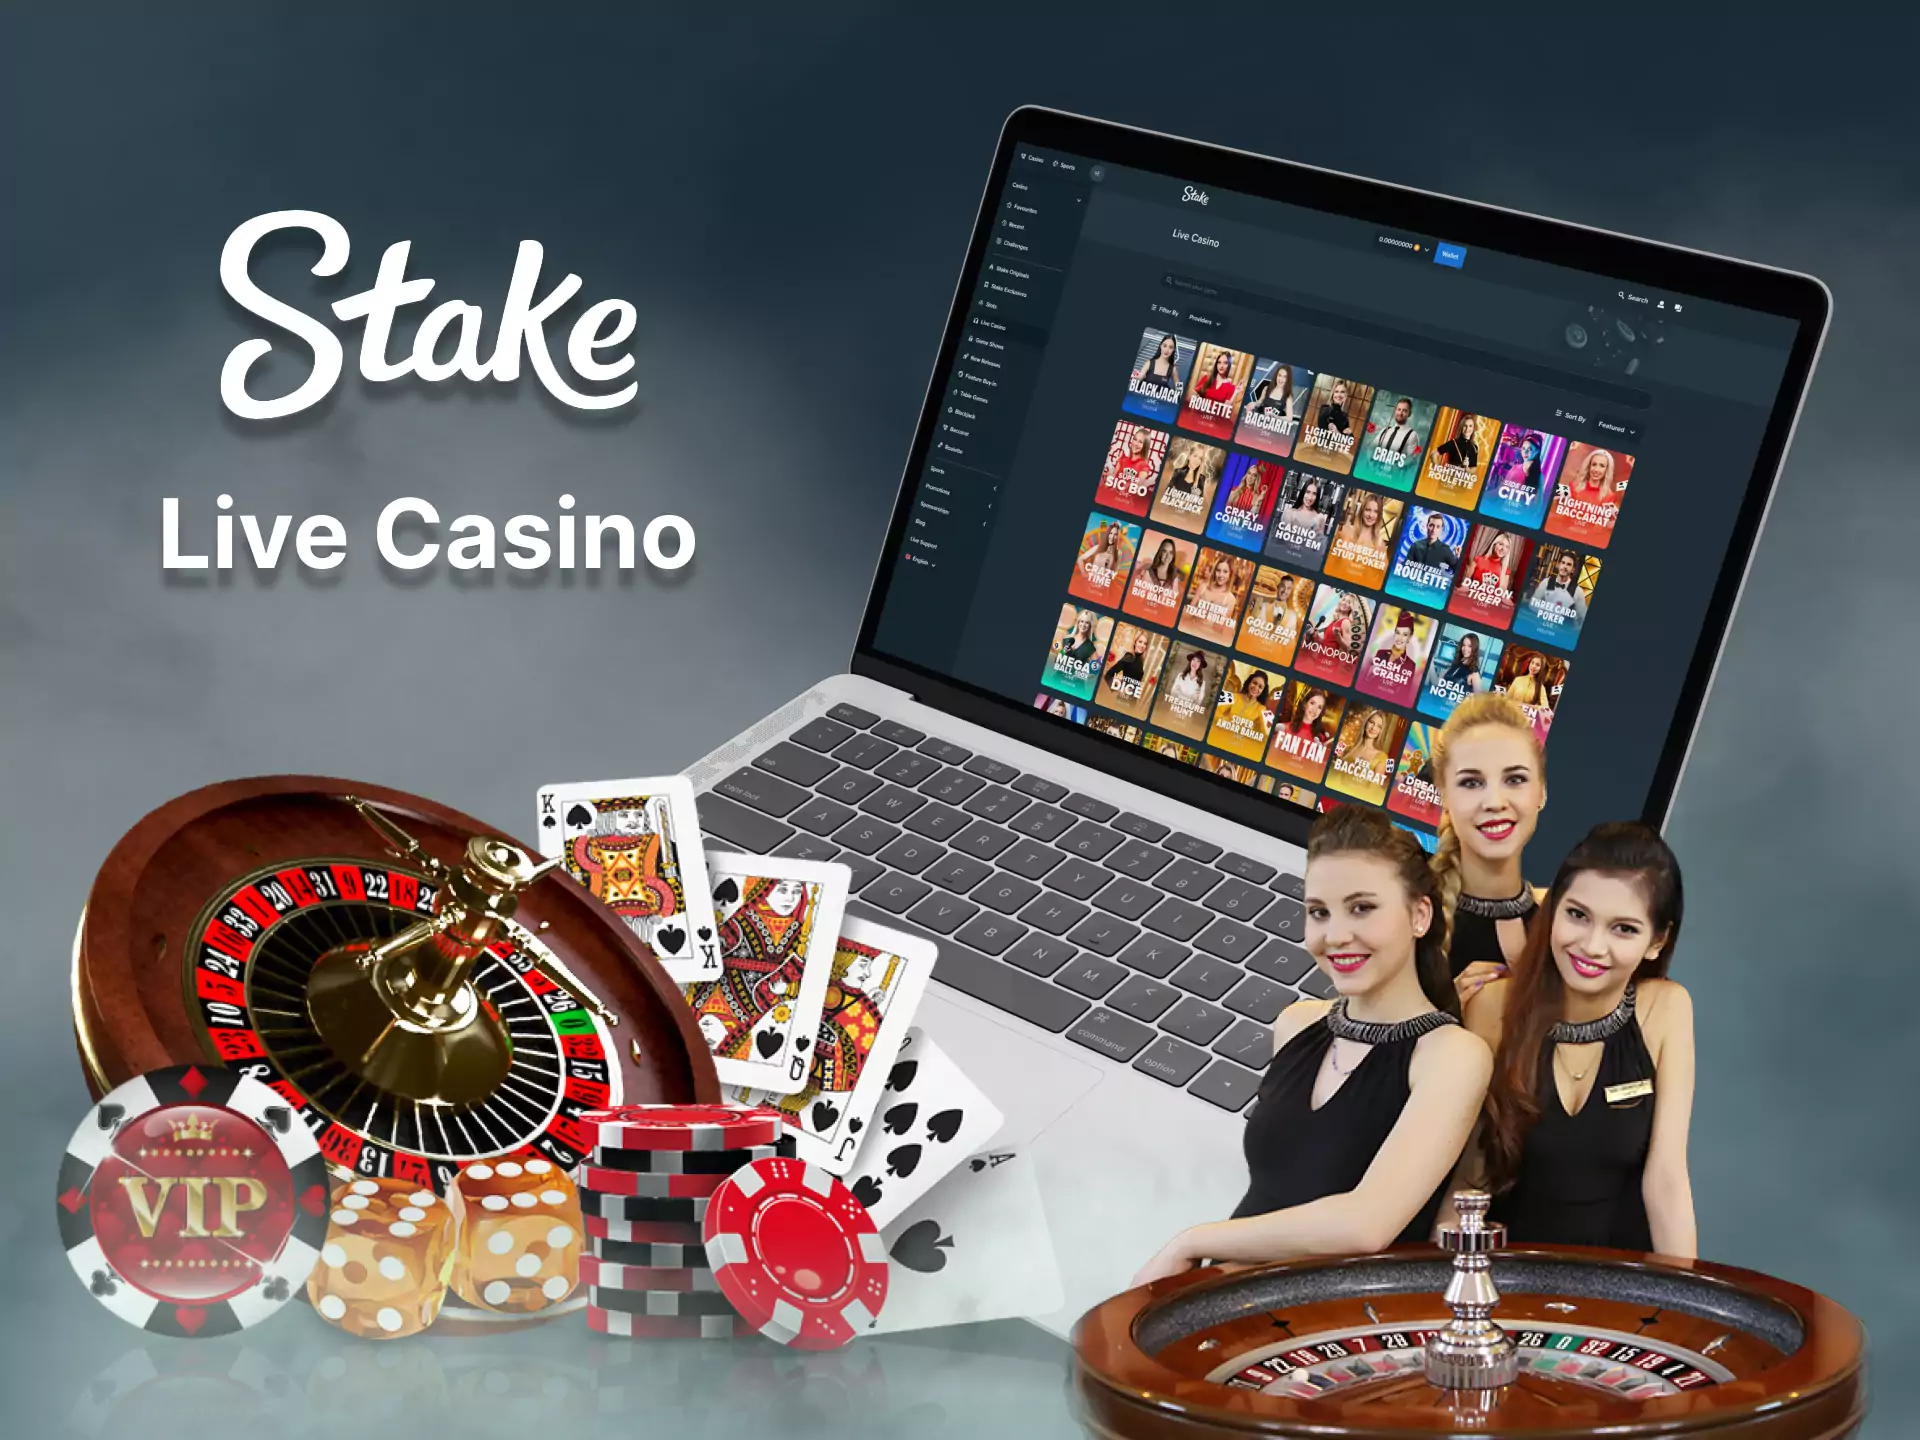 In the Stake Live Casino users from India usually prefer table games and roulette.